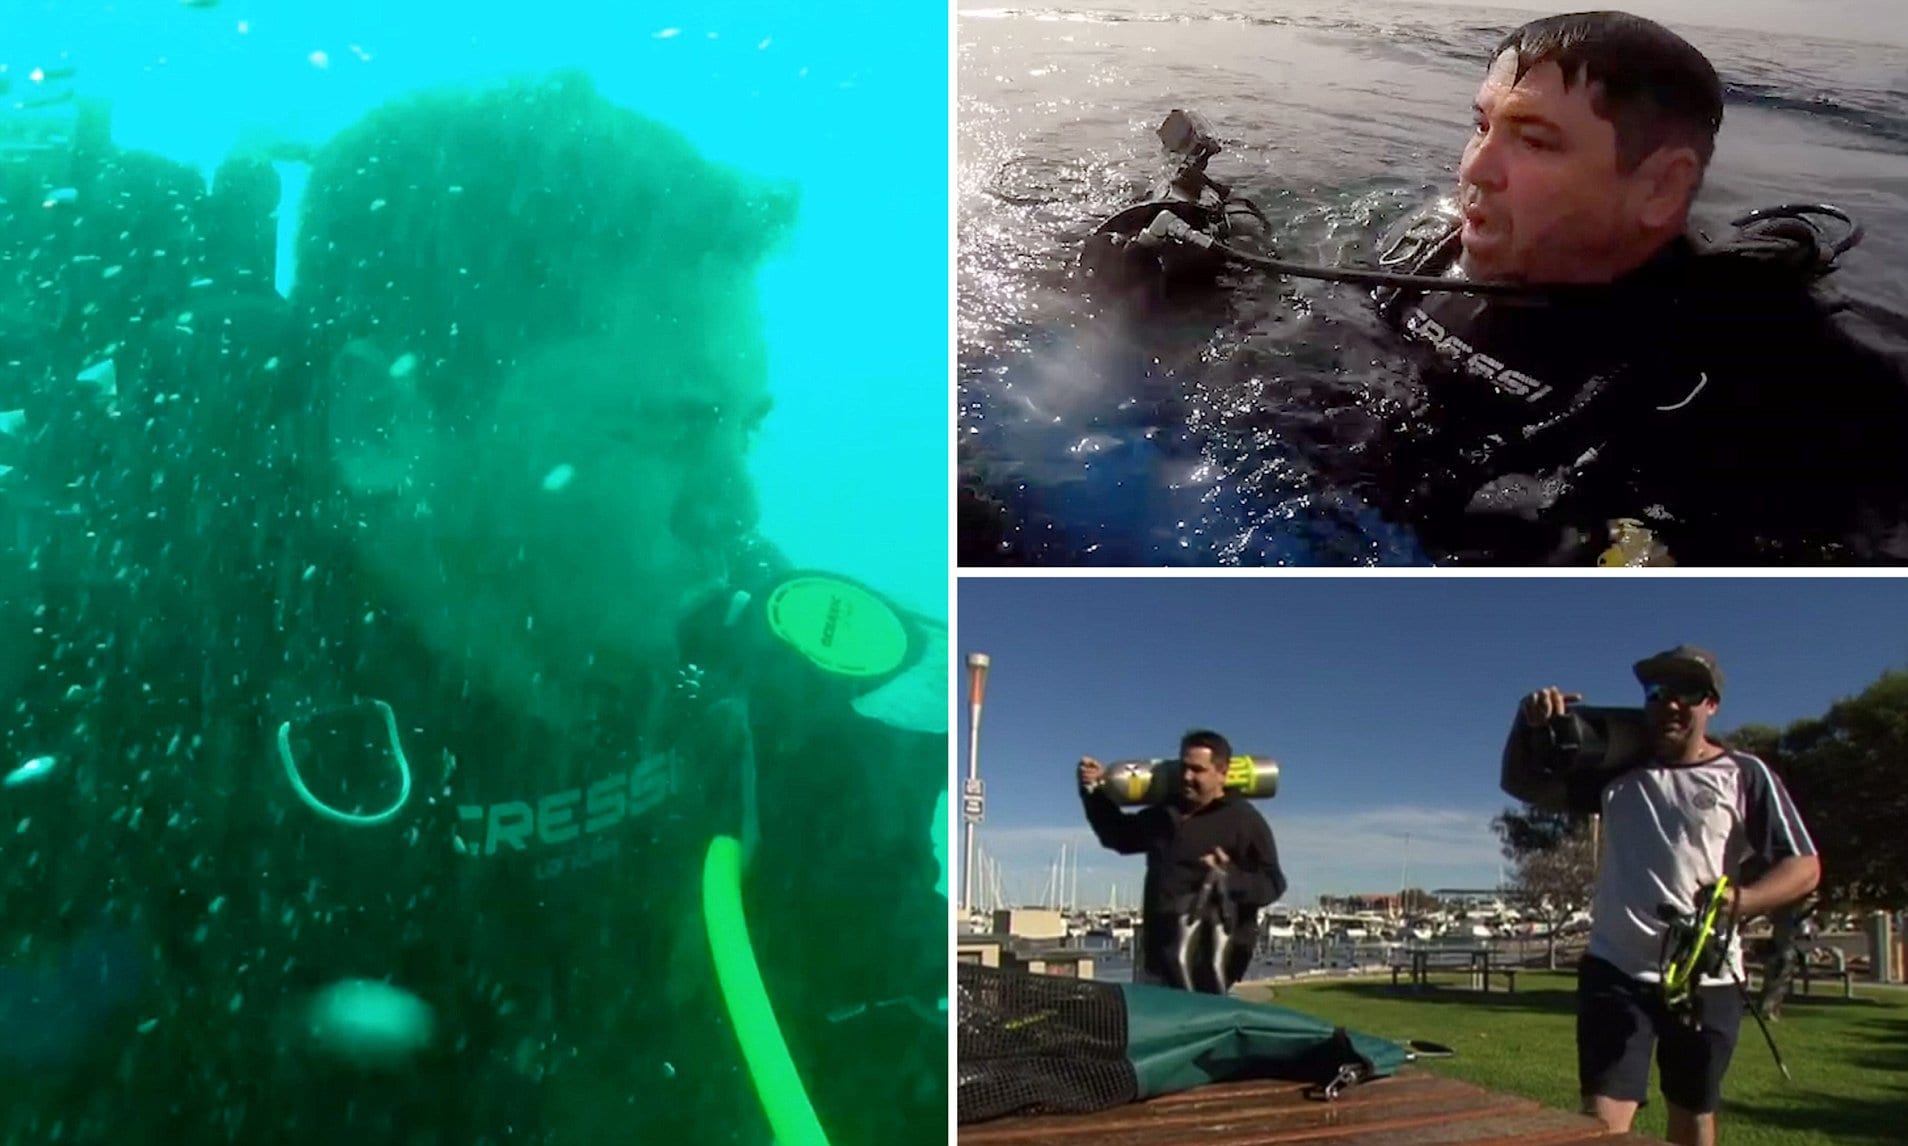 quick-thinking driver saves mate after underwater oxygen drama